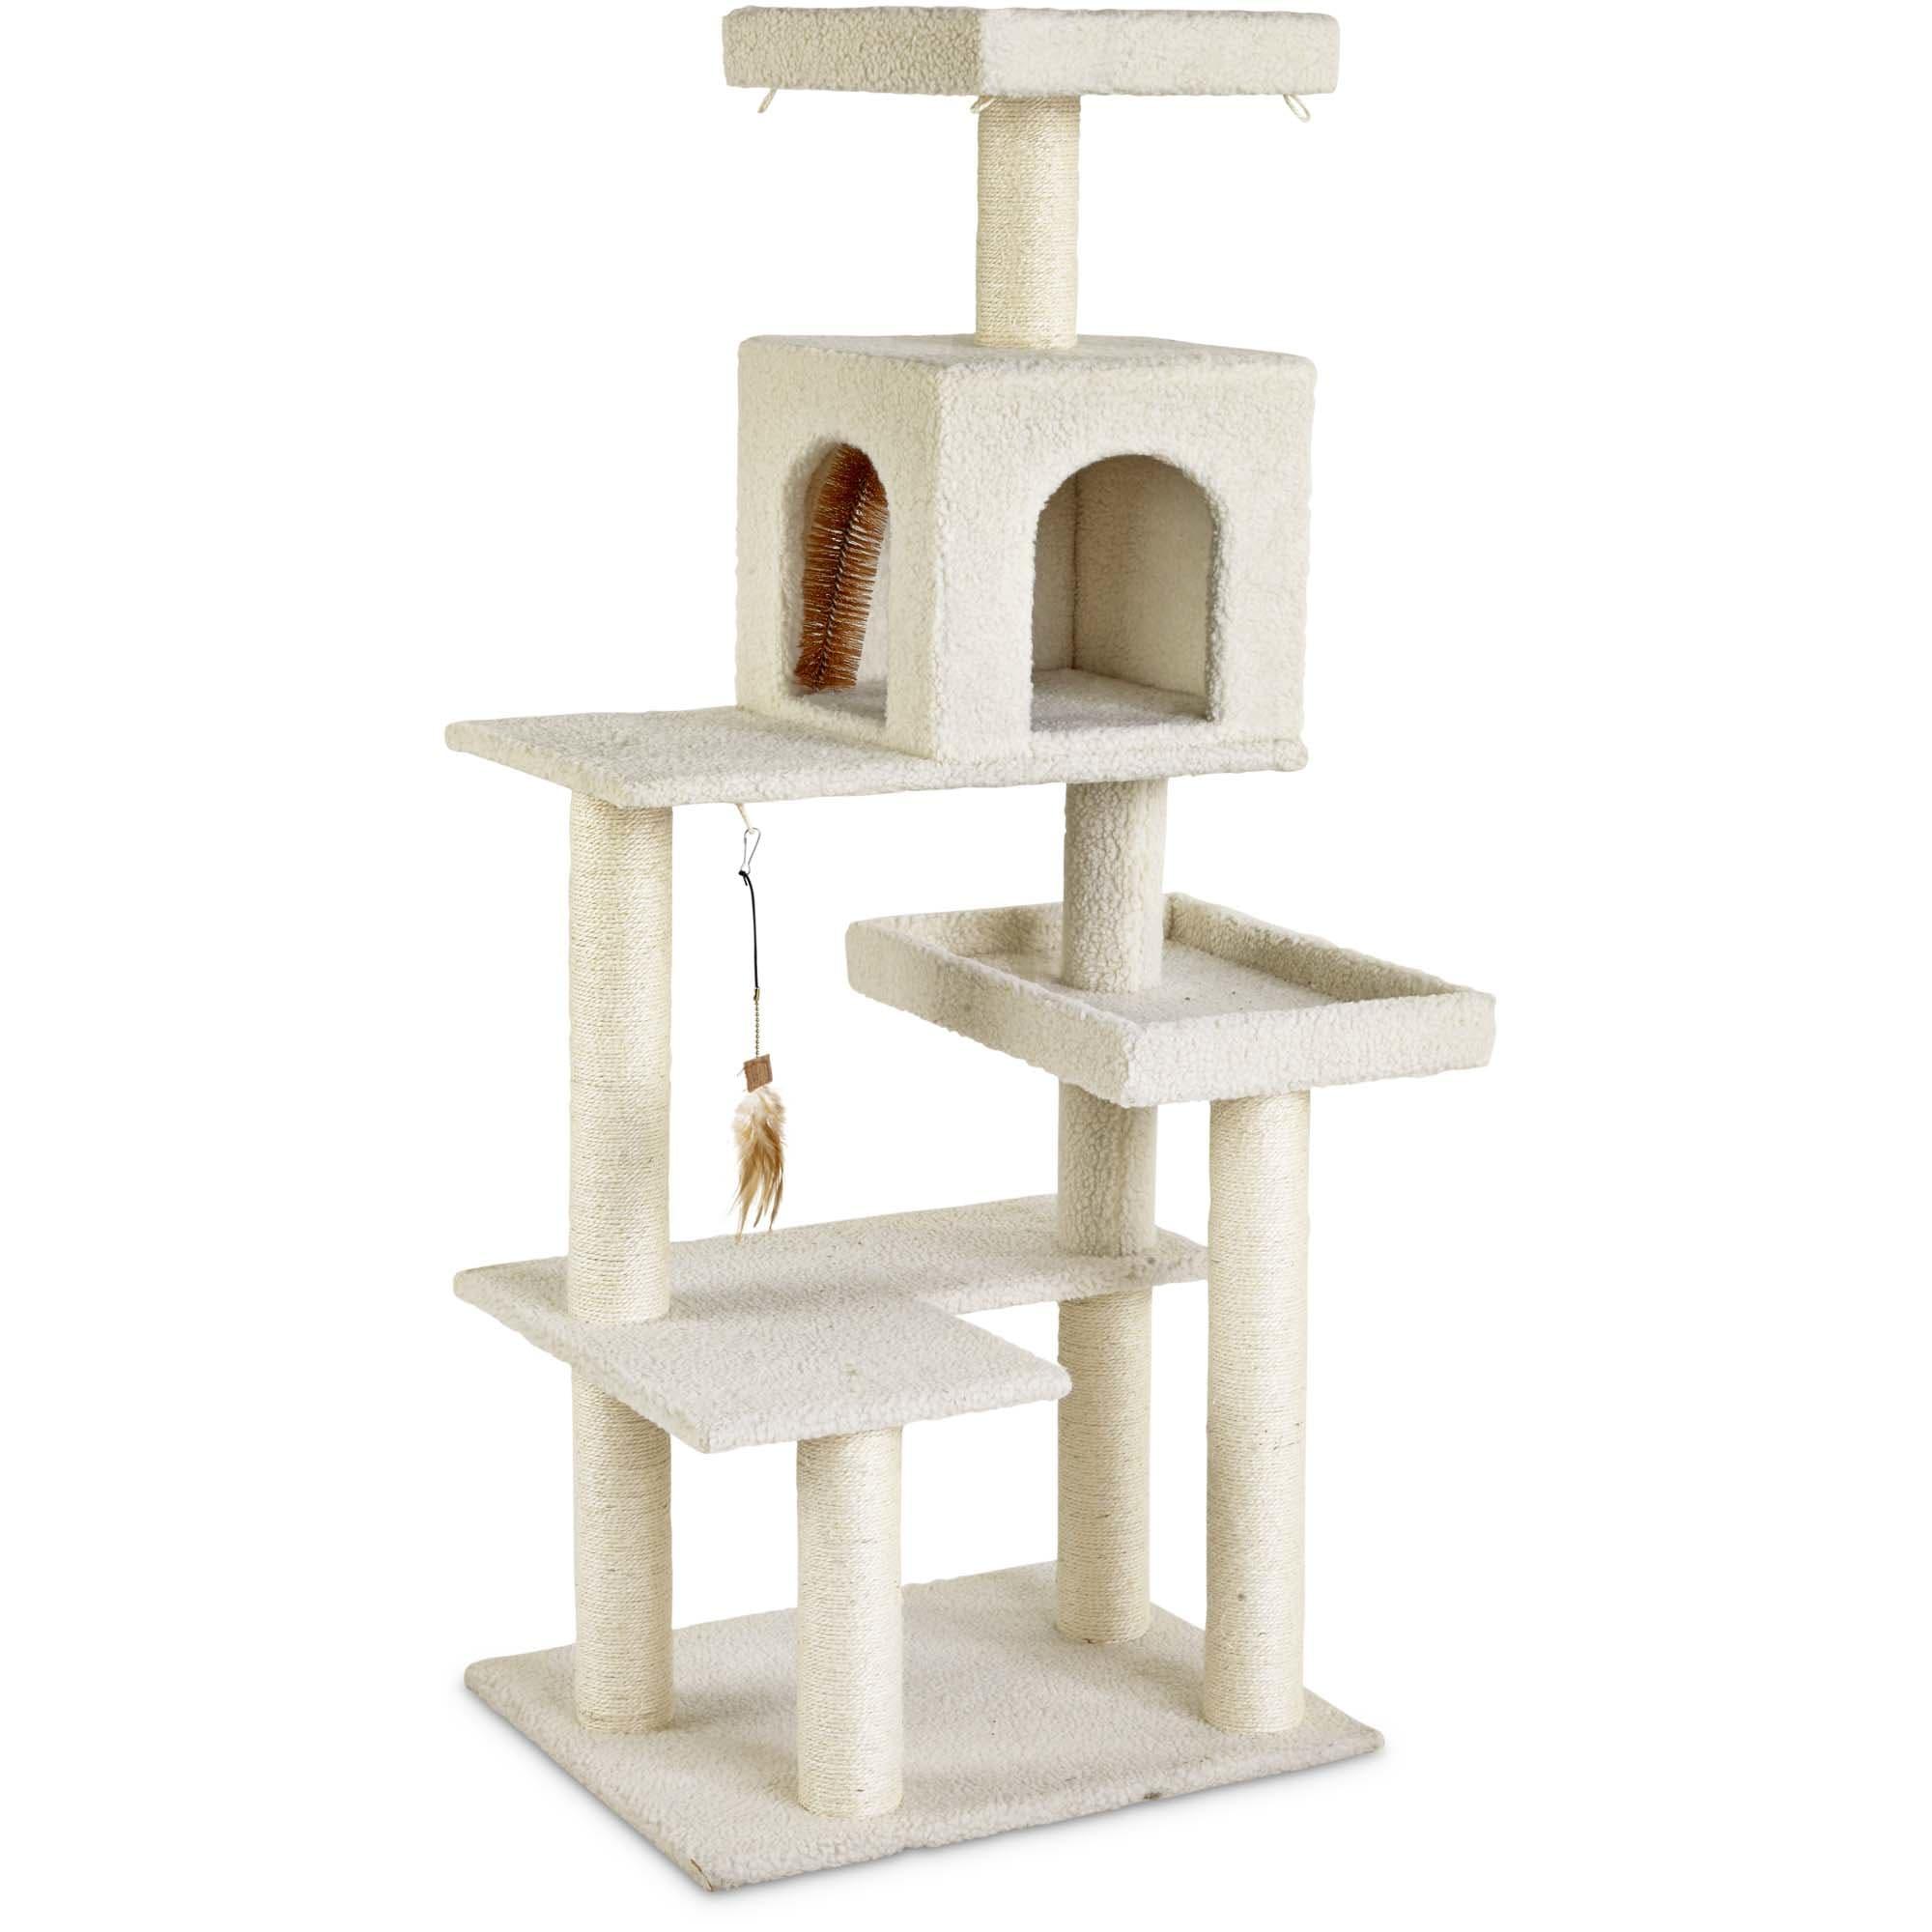 54in You and Me 5-Level Cat Tree for $43 Shipped